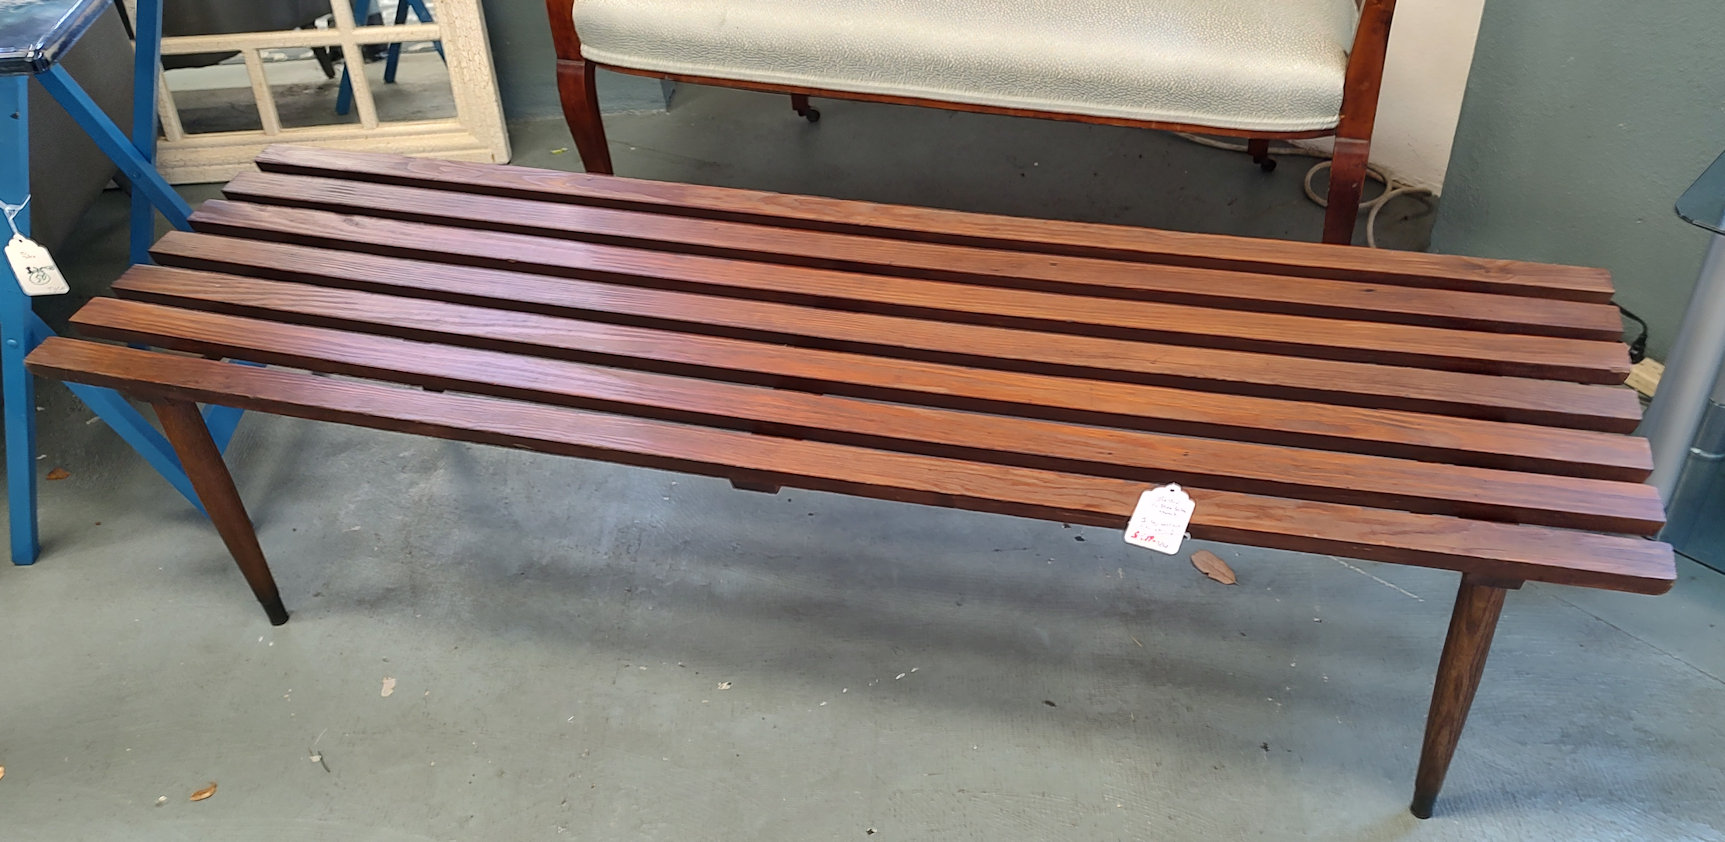 LR0691-slatted-coffee-table-bench